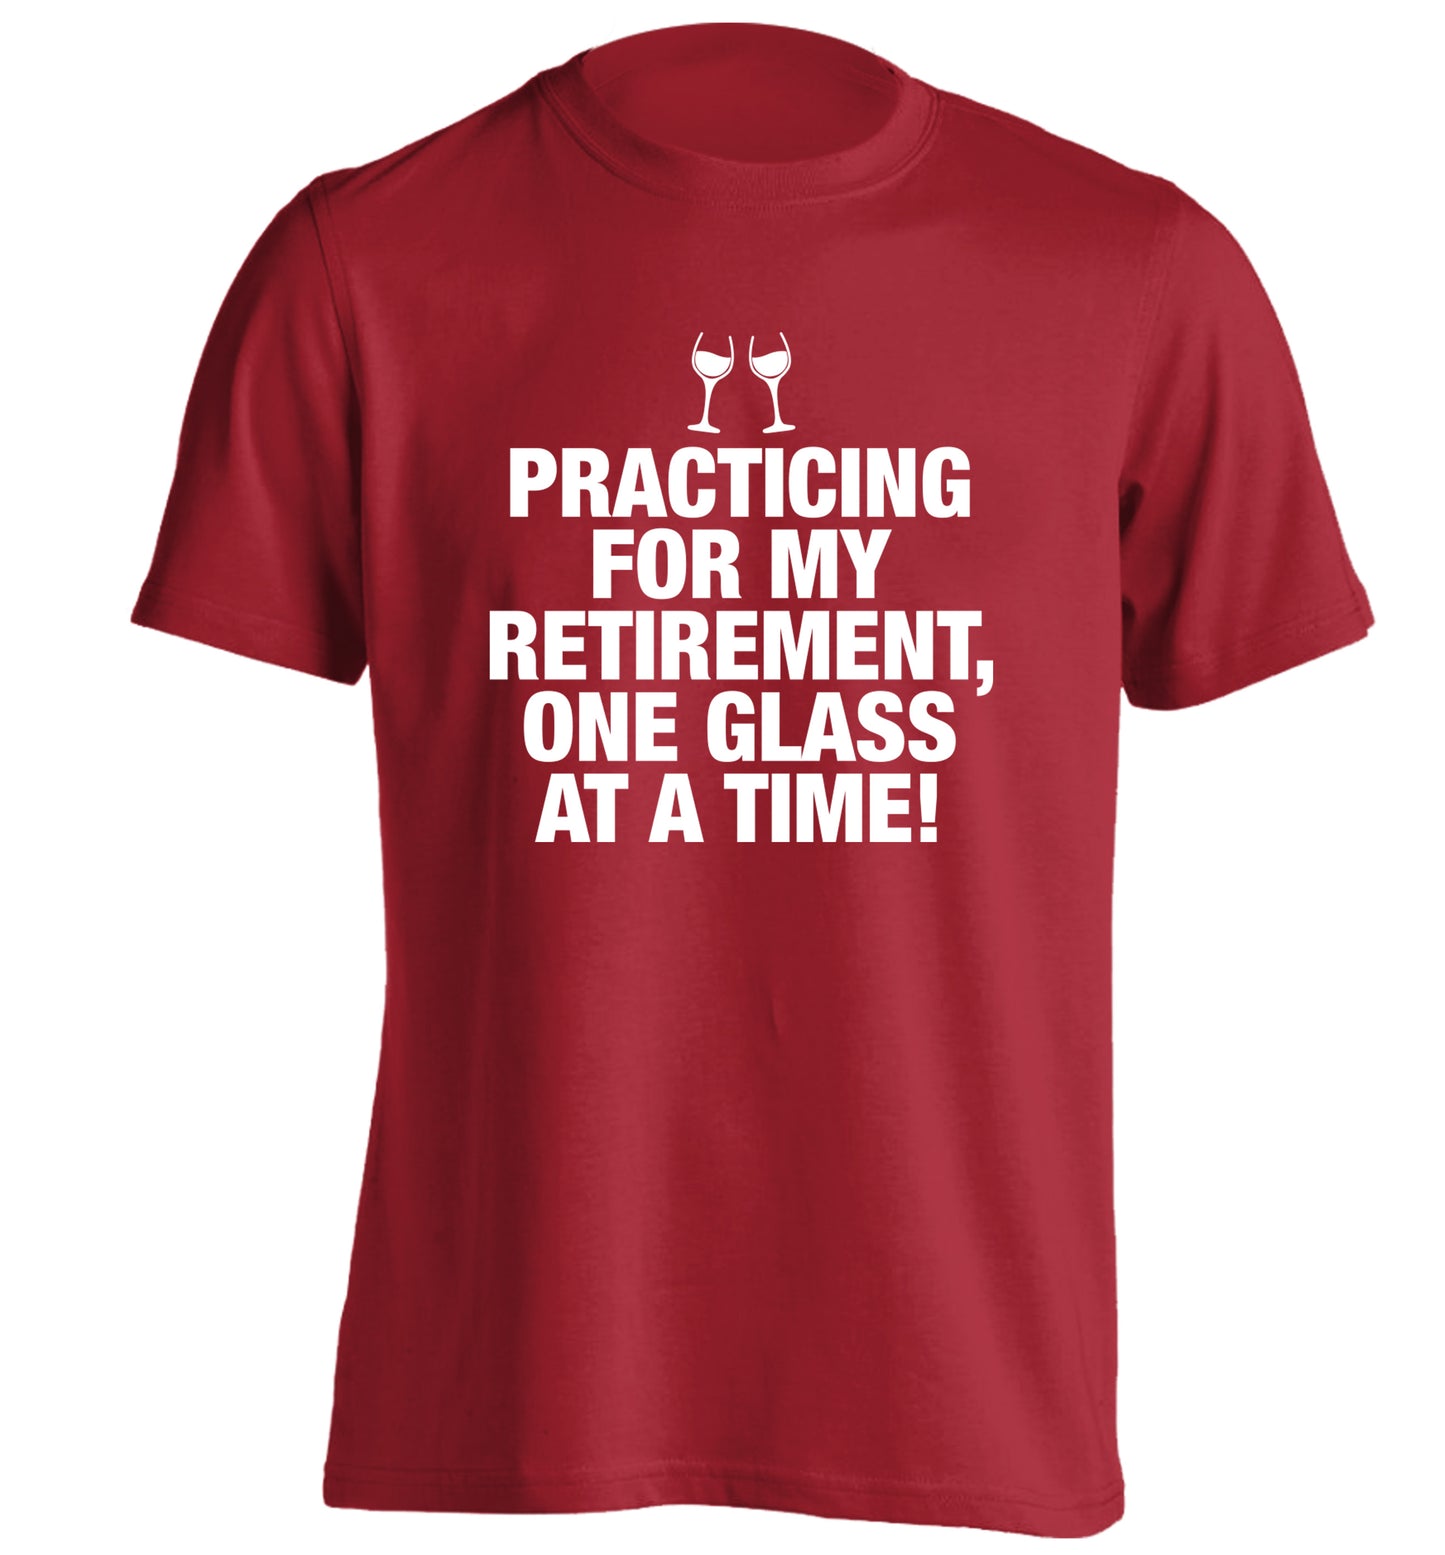 Practicing my retirement one glass at a time adults unisex red Tshirt 2XL